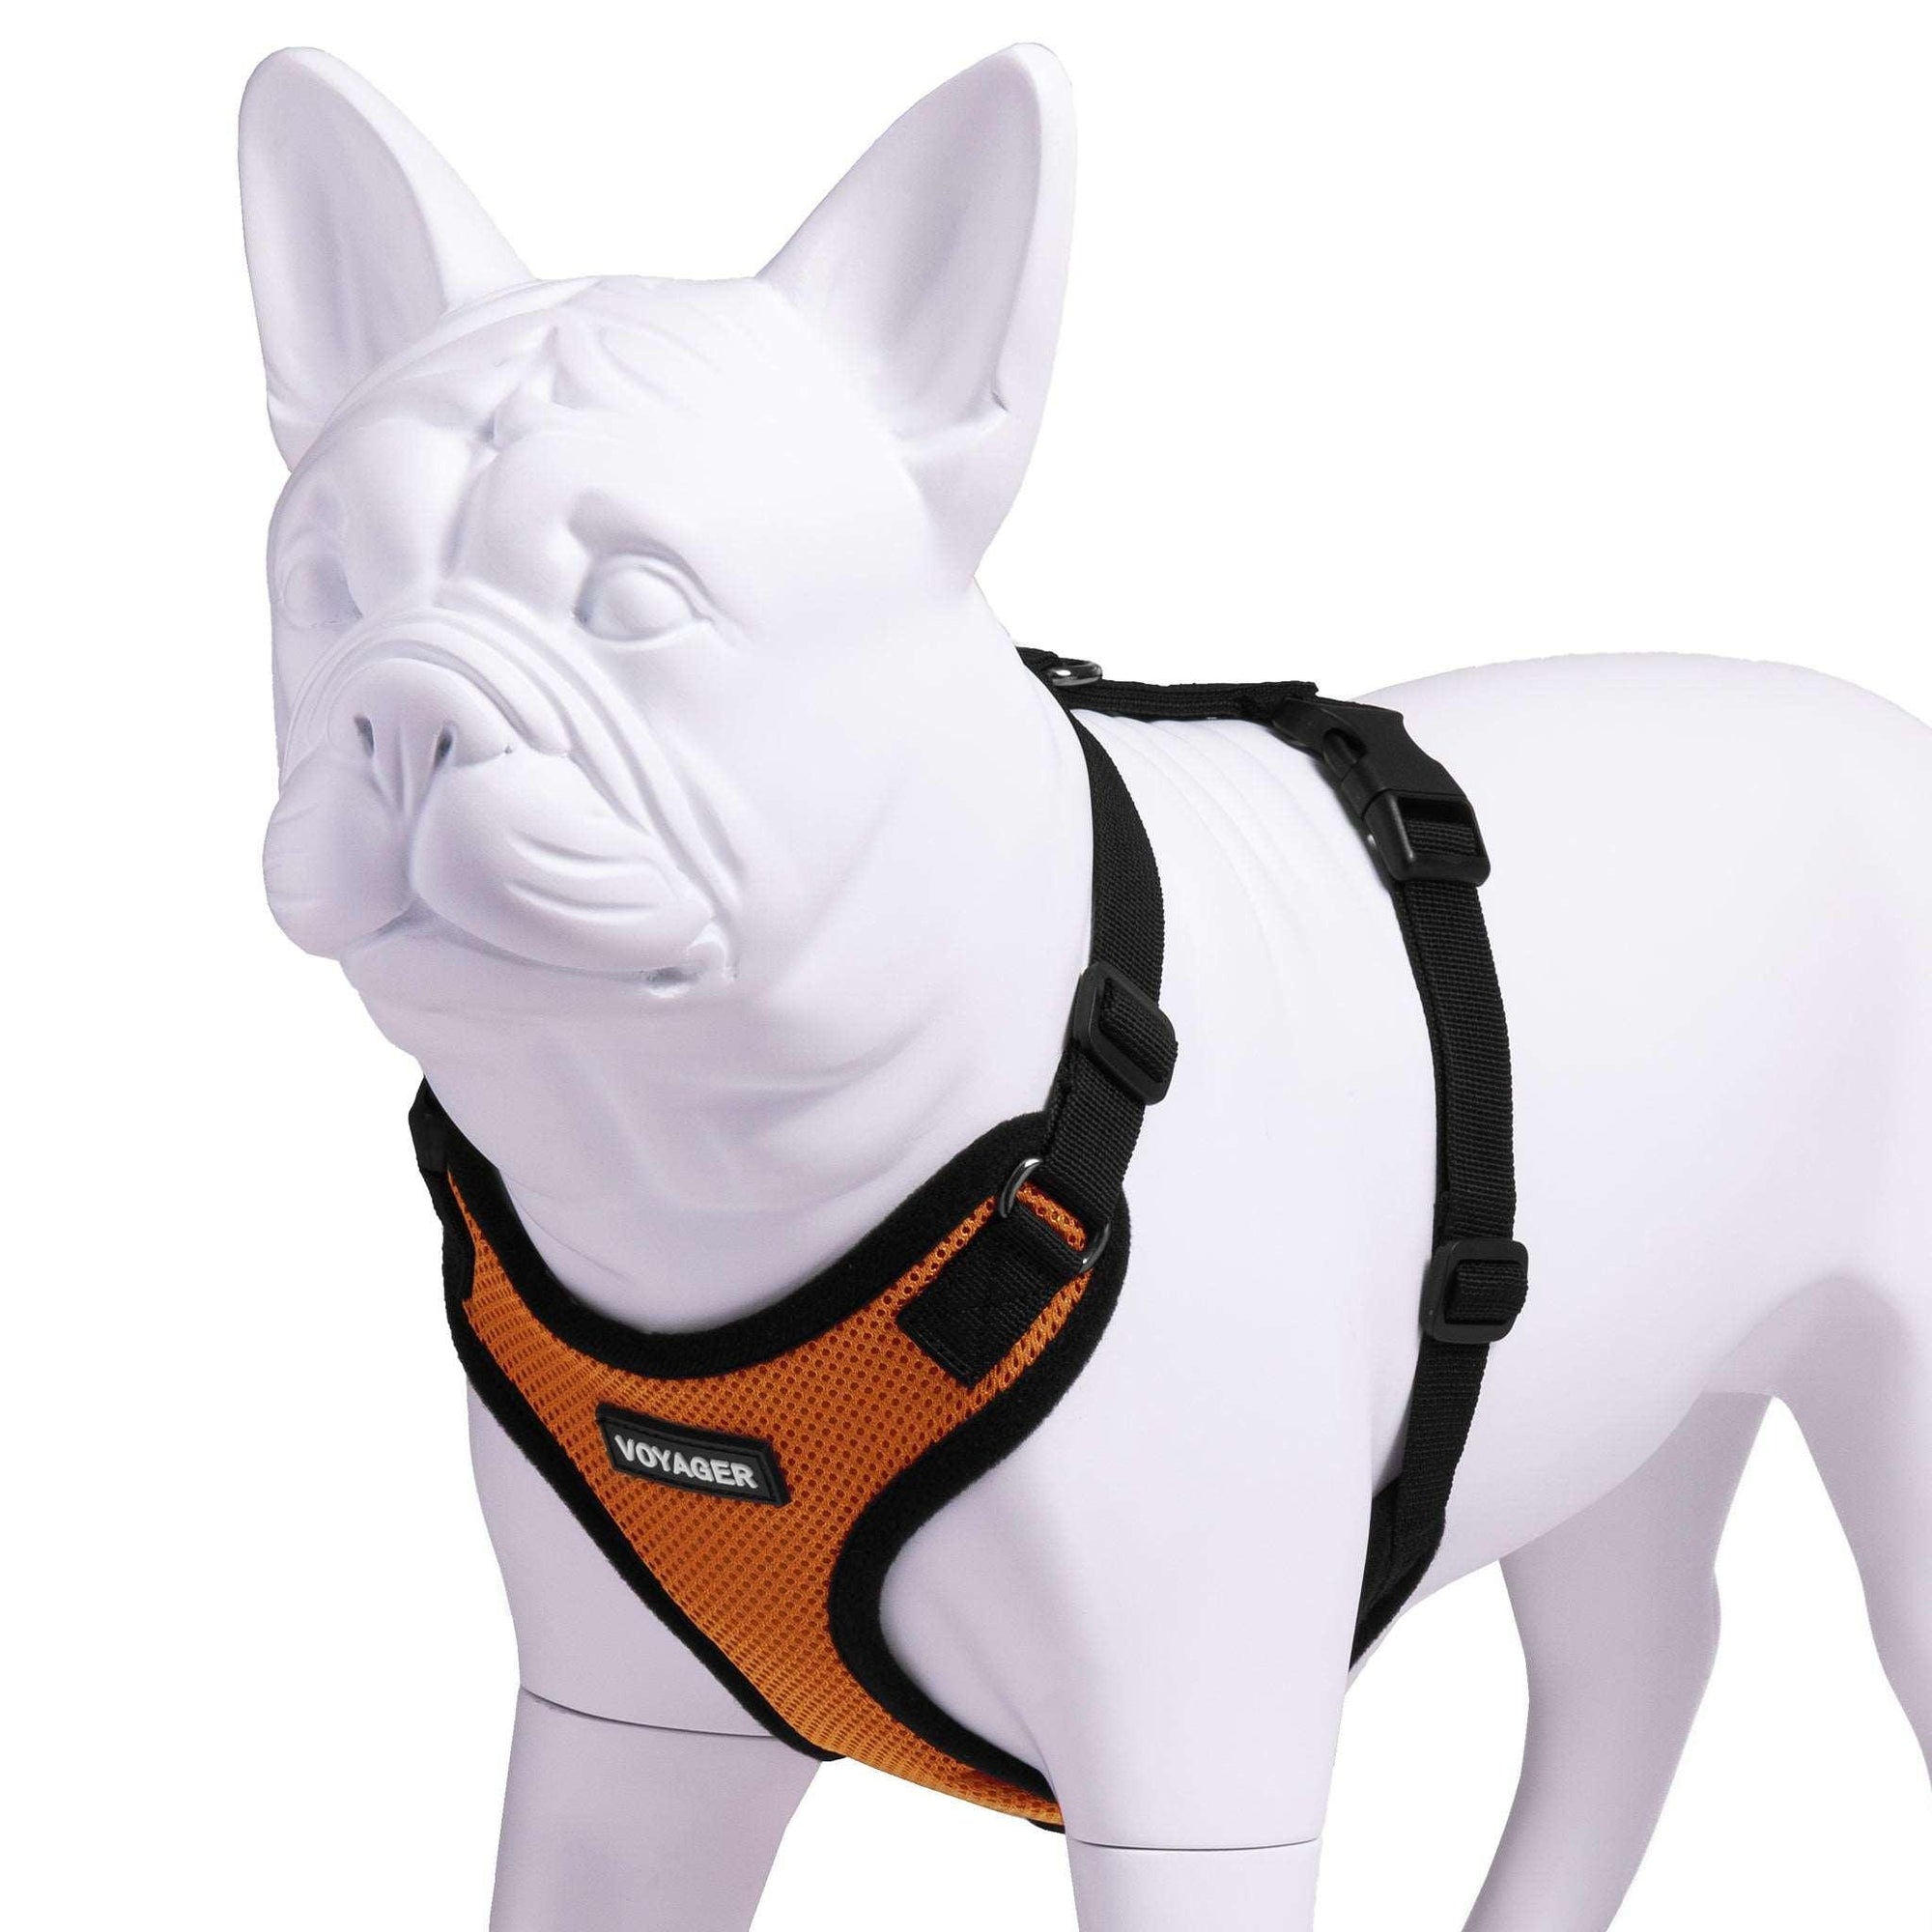 VOYAGER Step-In Lock Dog Harness in Orange with Black Trim and Webbing - Expanded